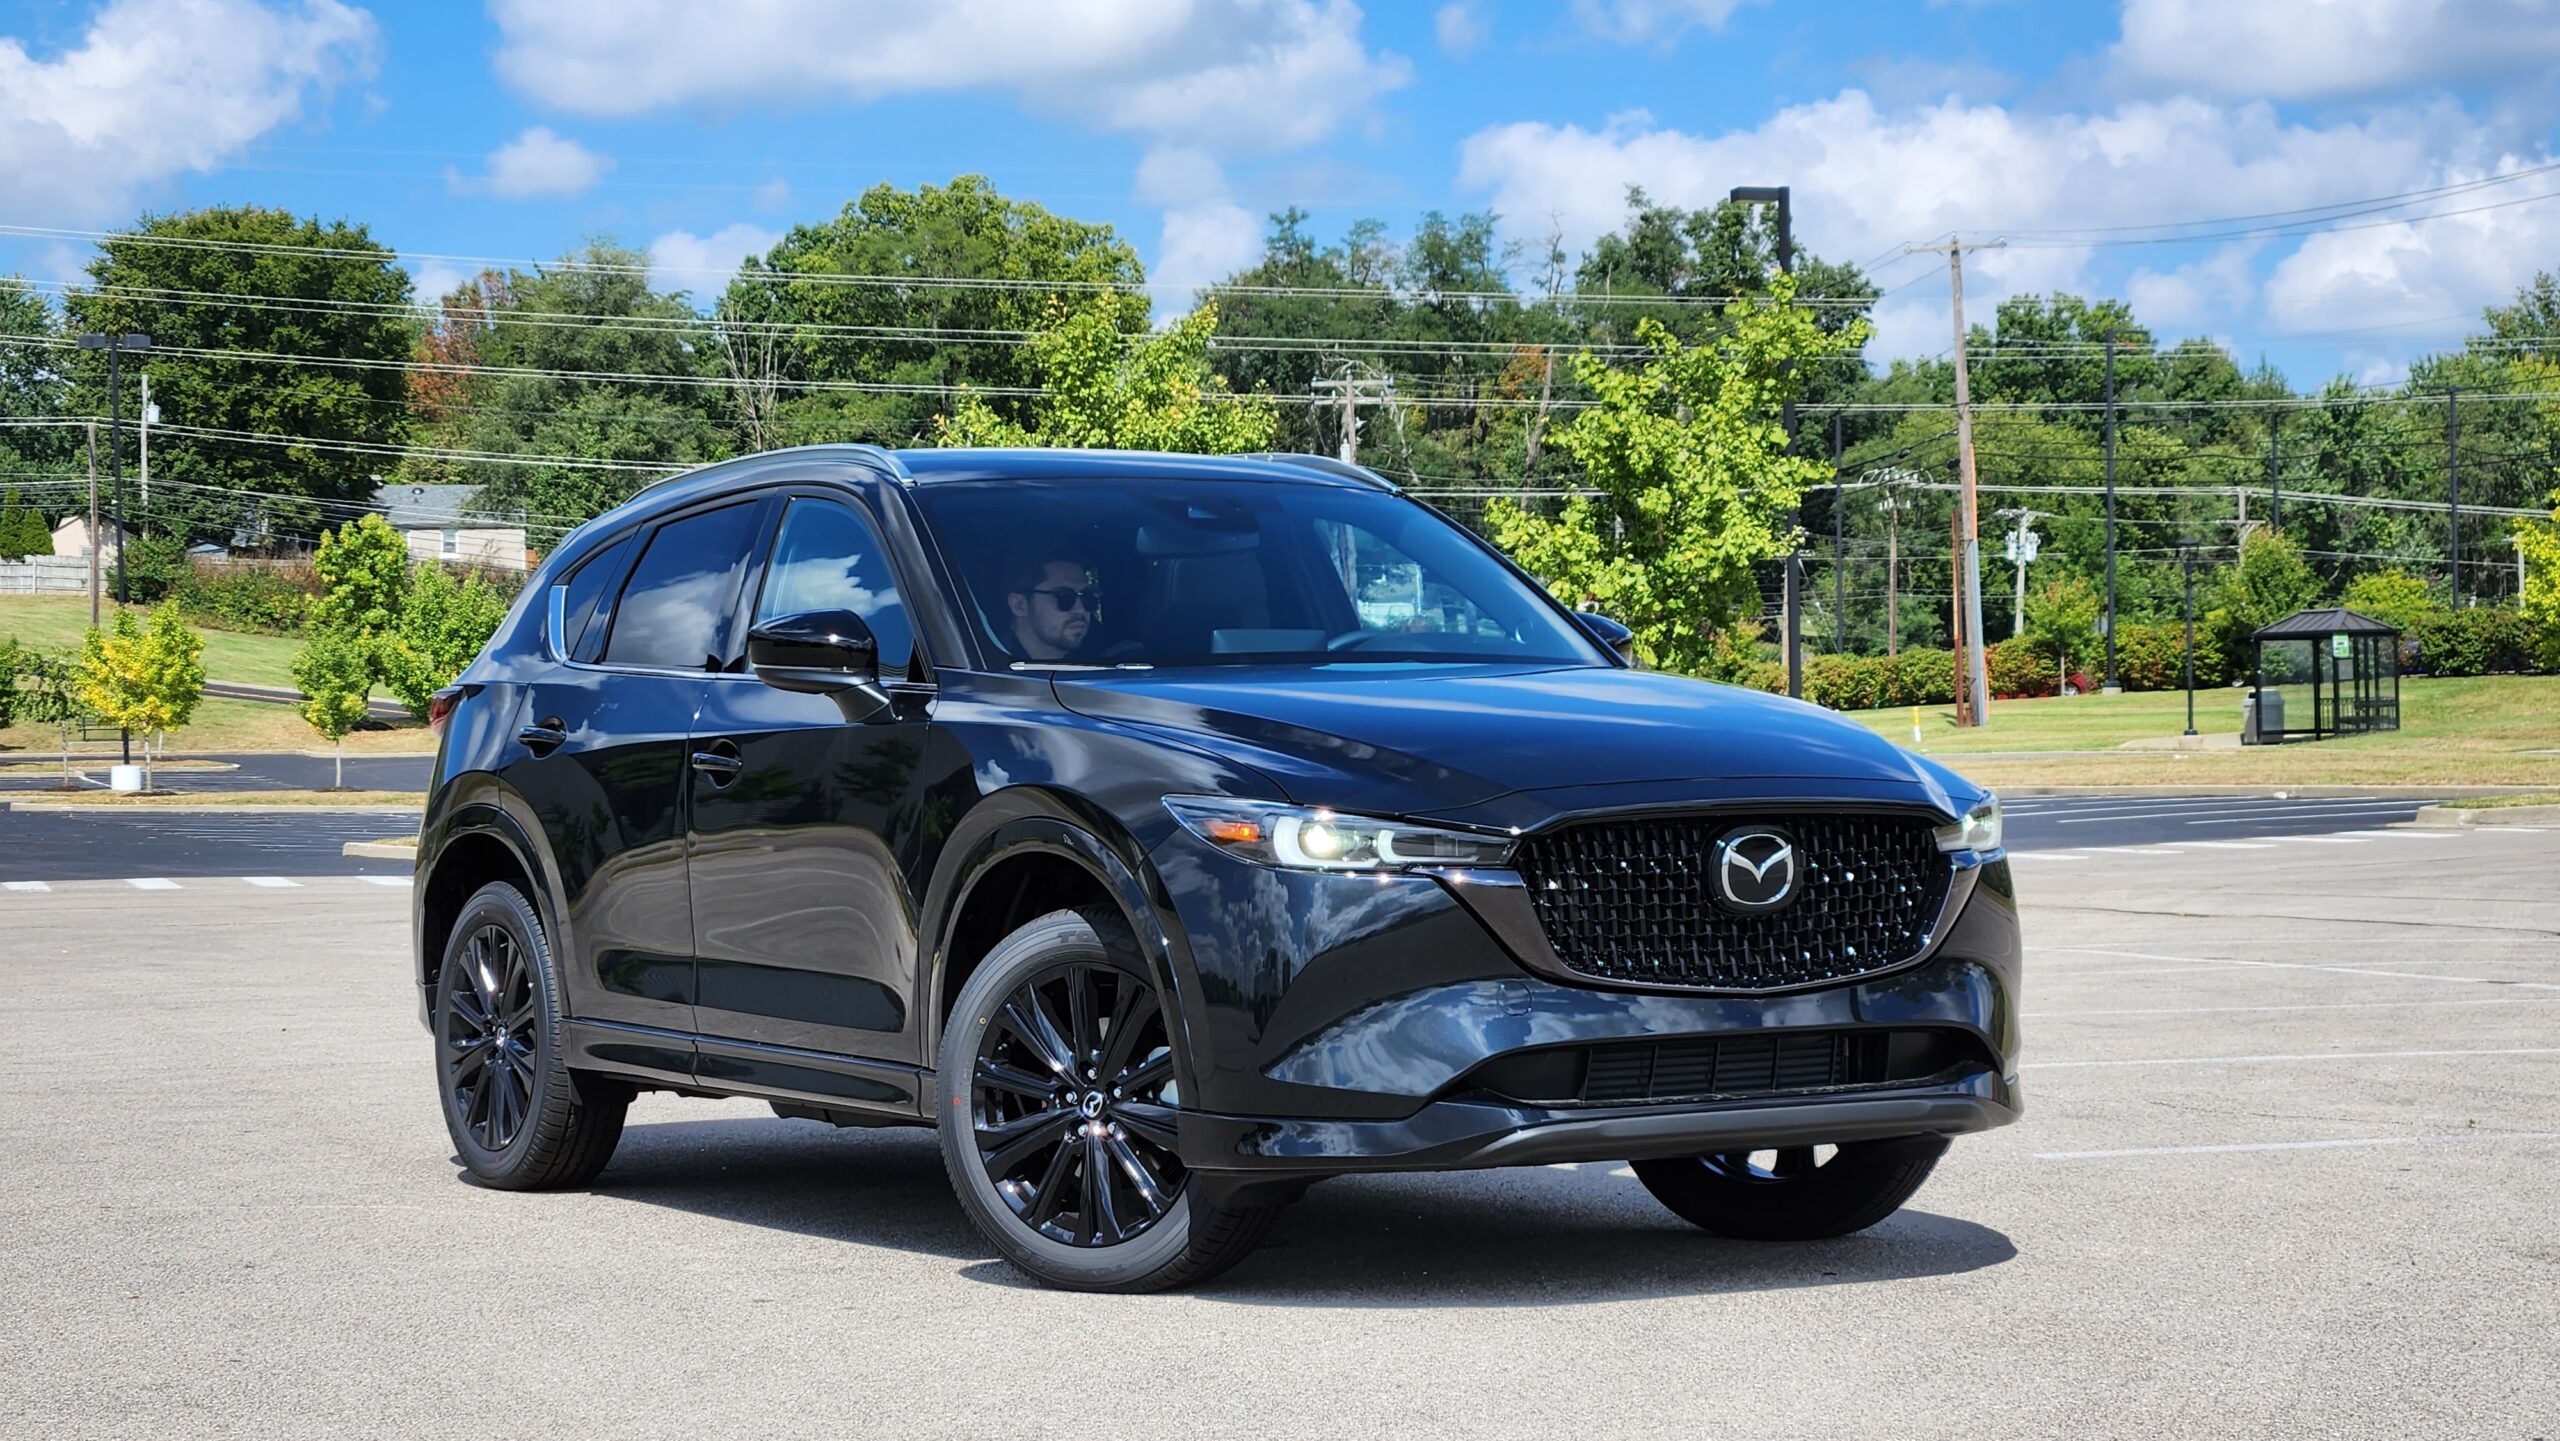 5 things that define the Mazda CX-5